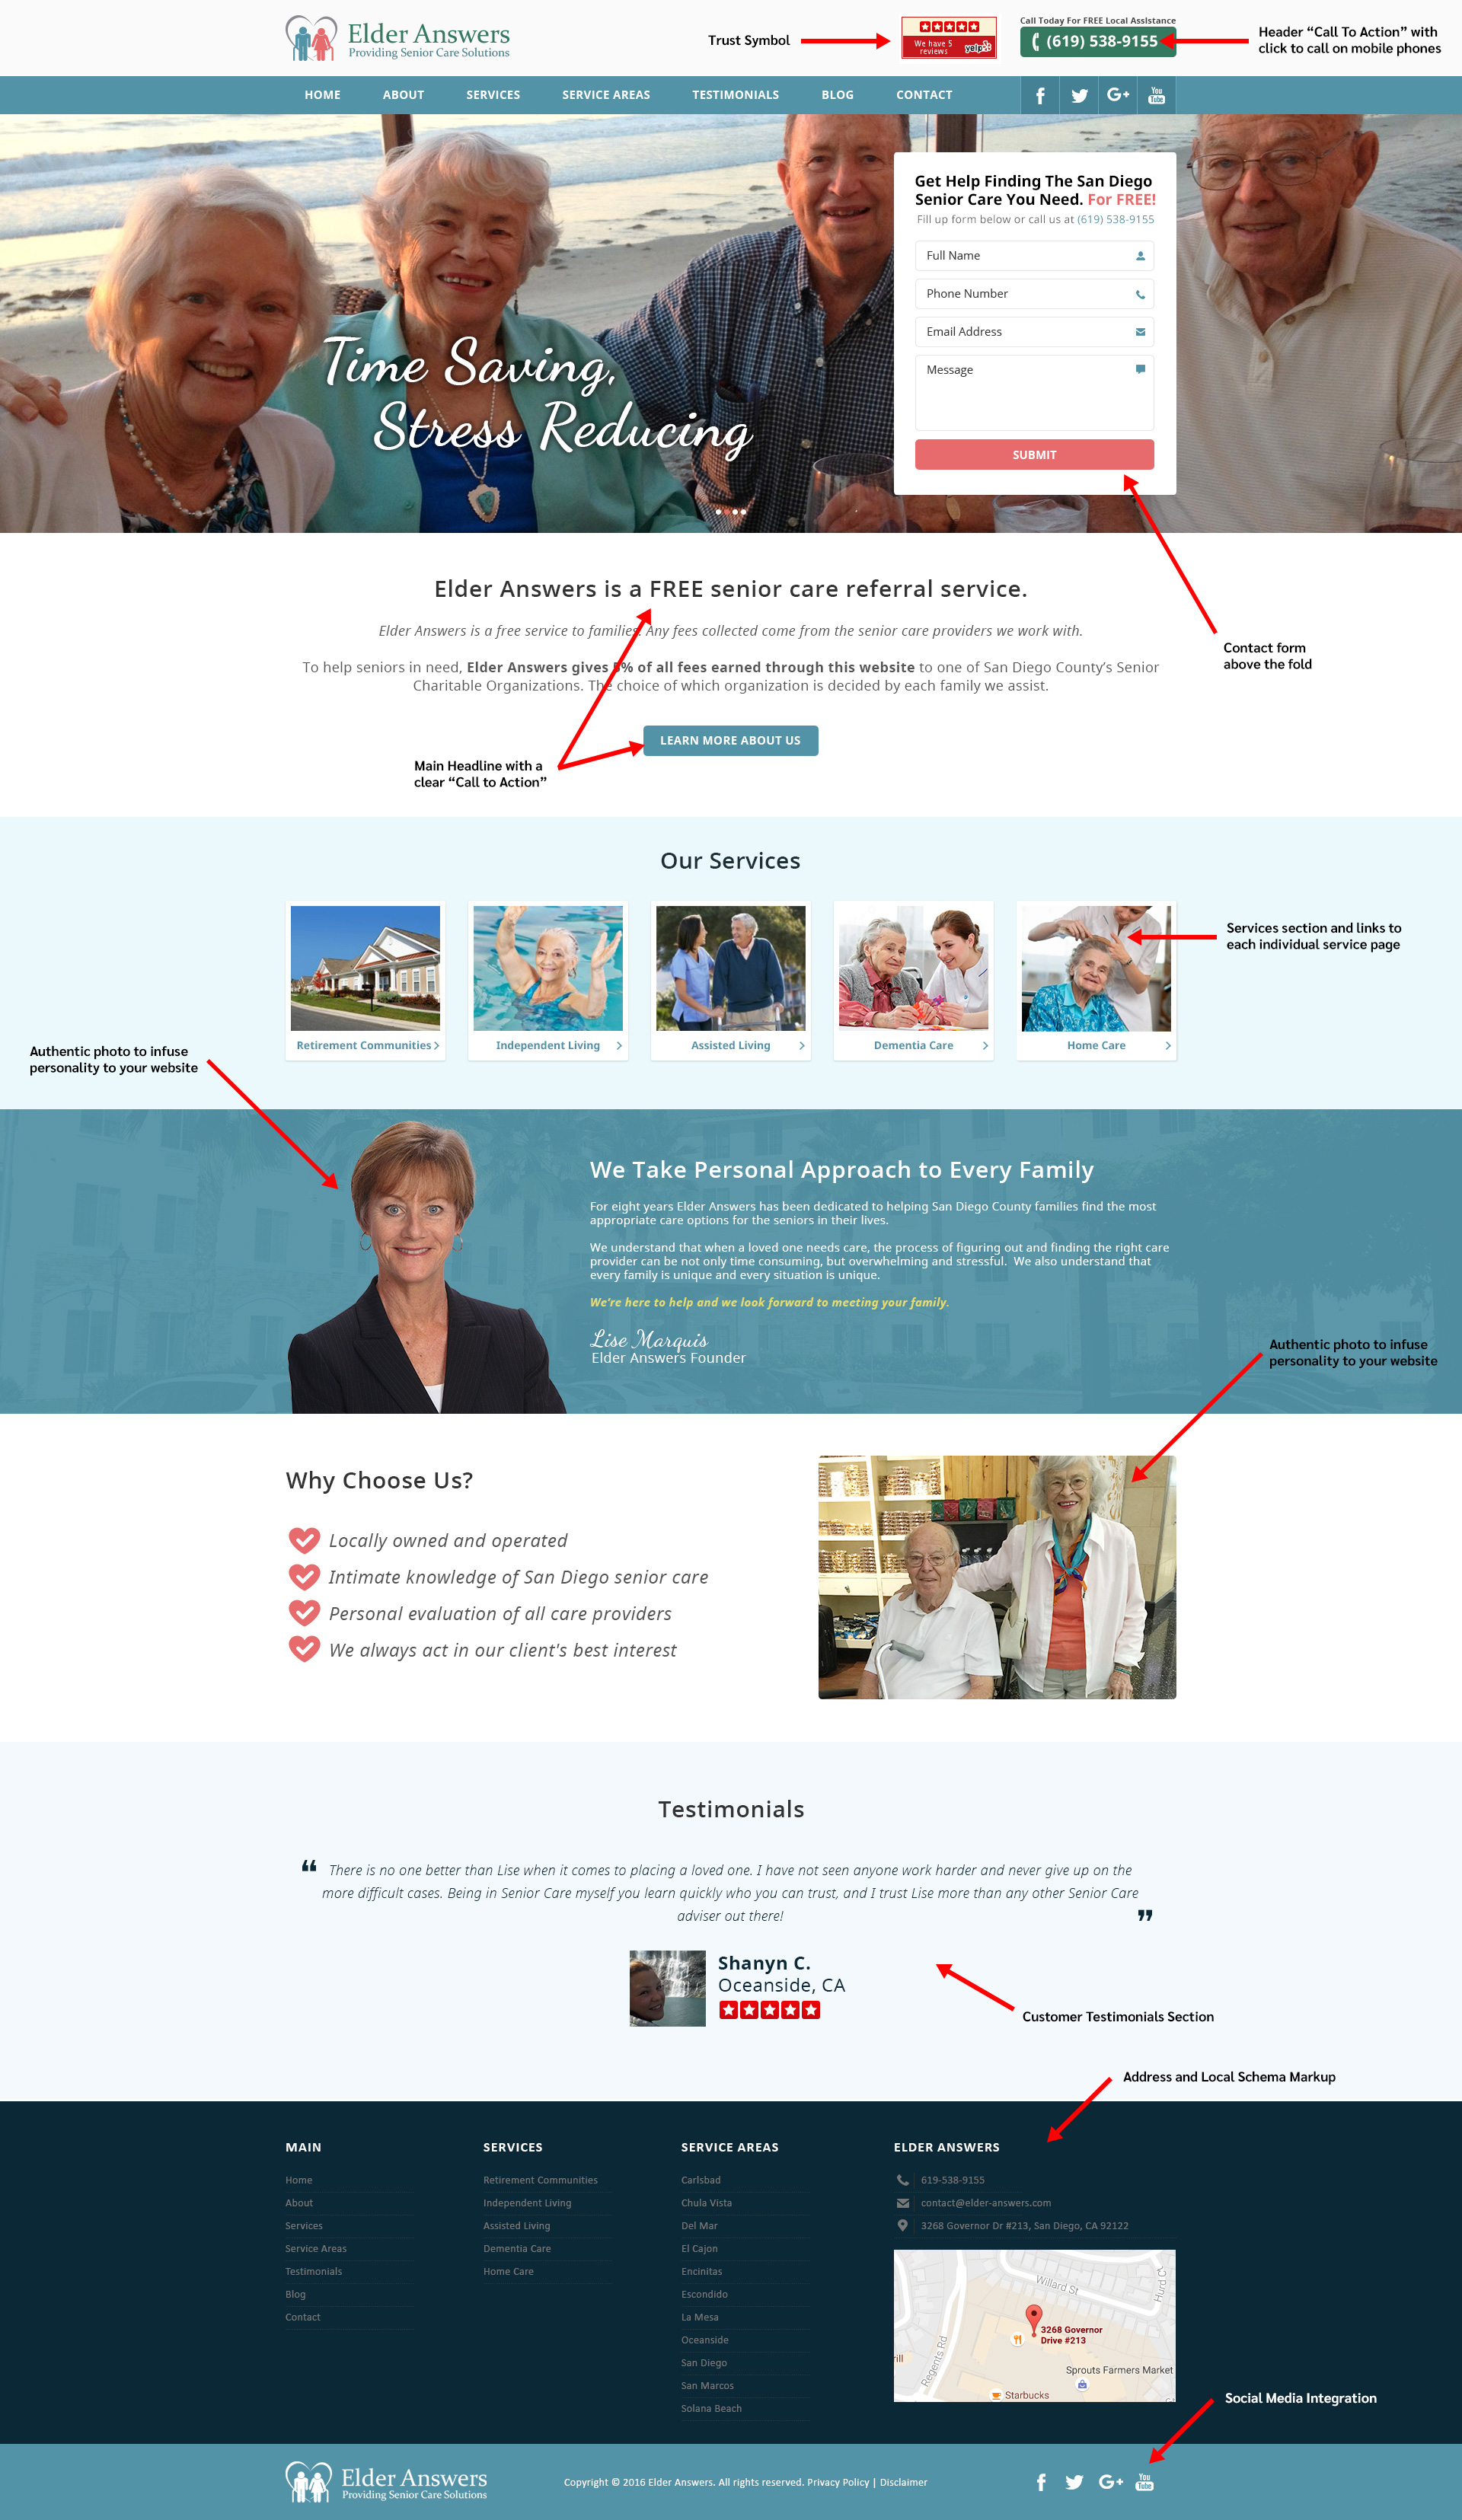 The Anatomy of a Website Built Specifically for Hospice Care